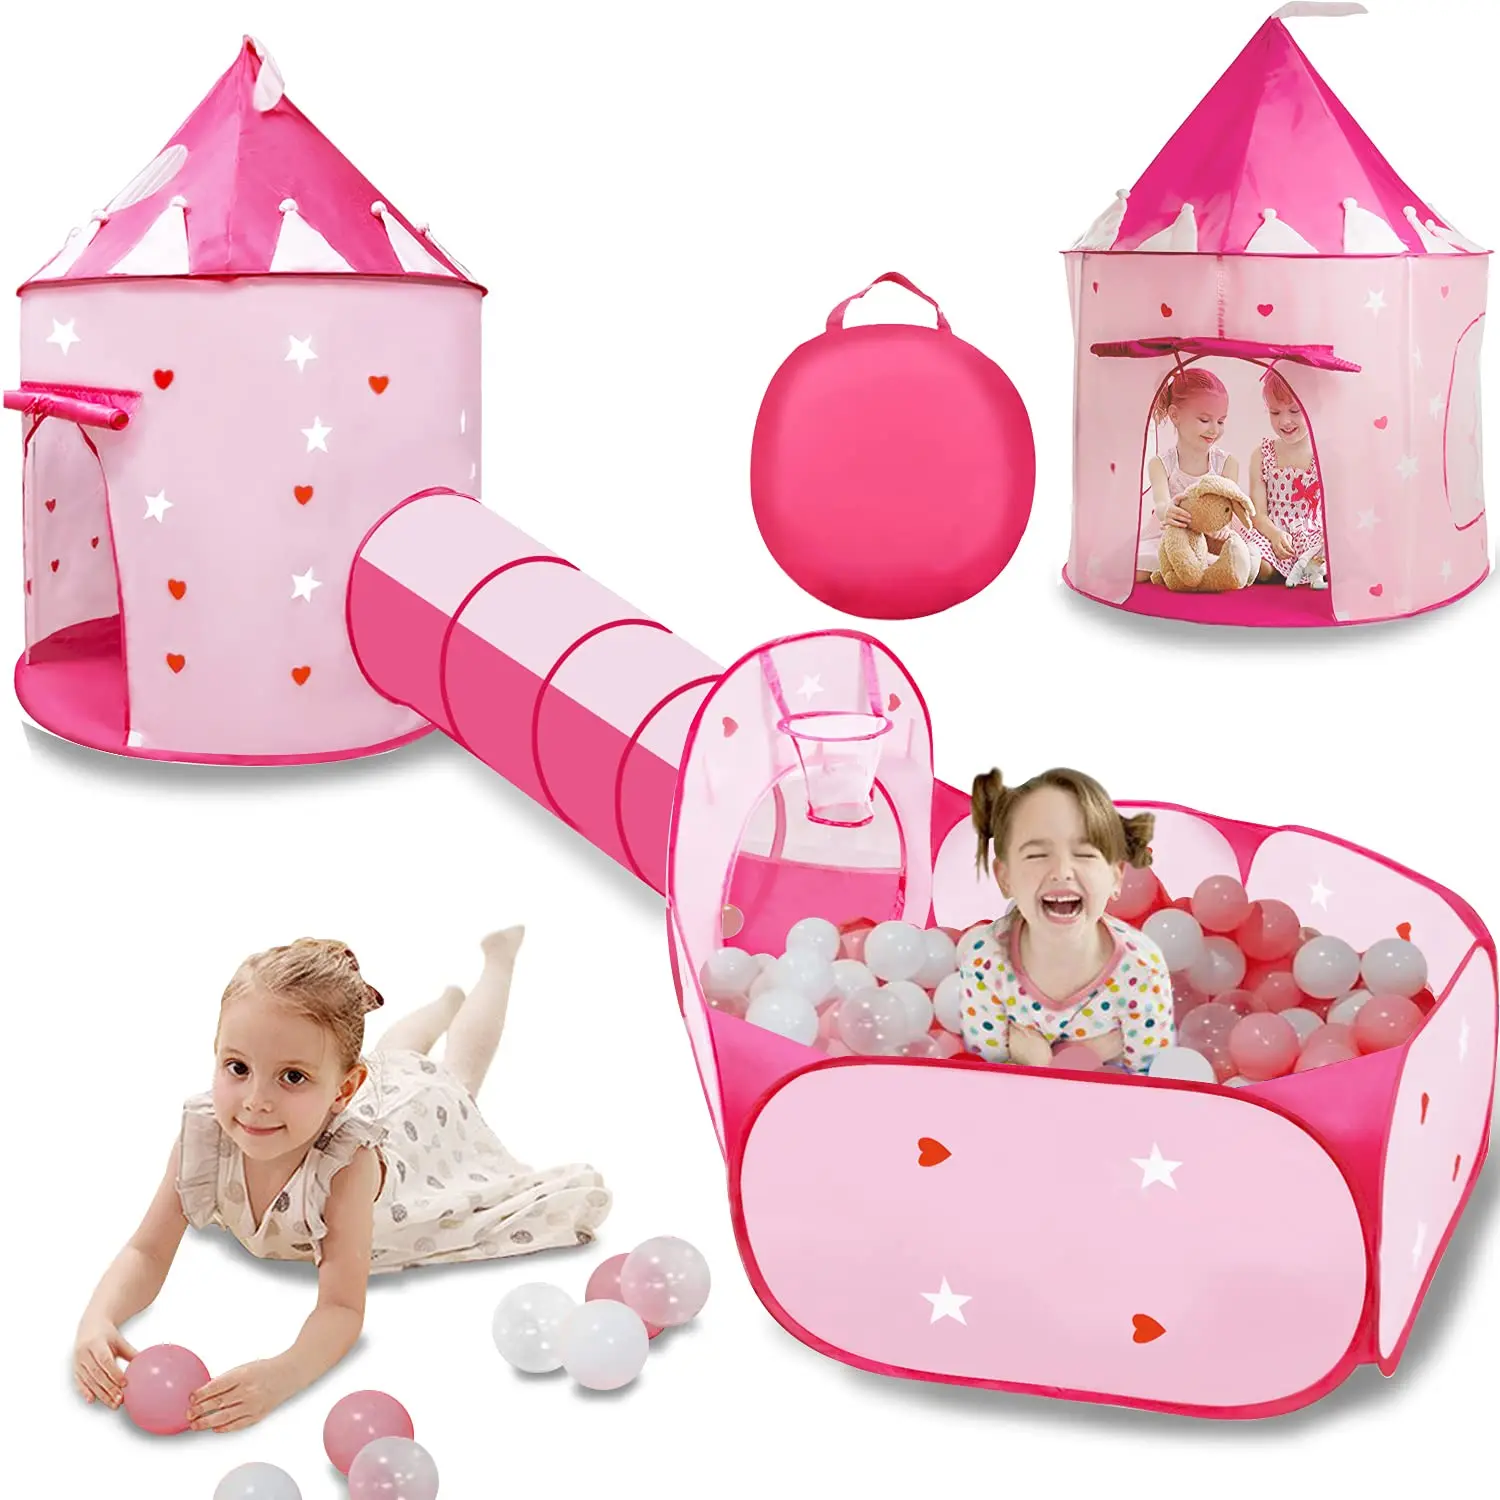 3PC Princess Tent for Girls with Kids Play Tents Pink Pop Up Playhouse Toys for Boys Indoor& Outdoor Games Crawl Tunnel and Baby Ball Pit for Toddlers Birthday Kid’s Gifts 